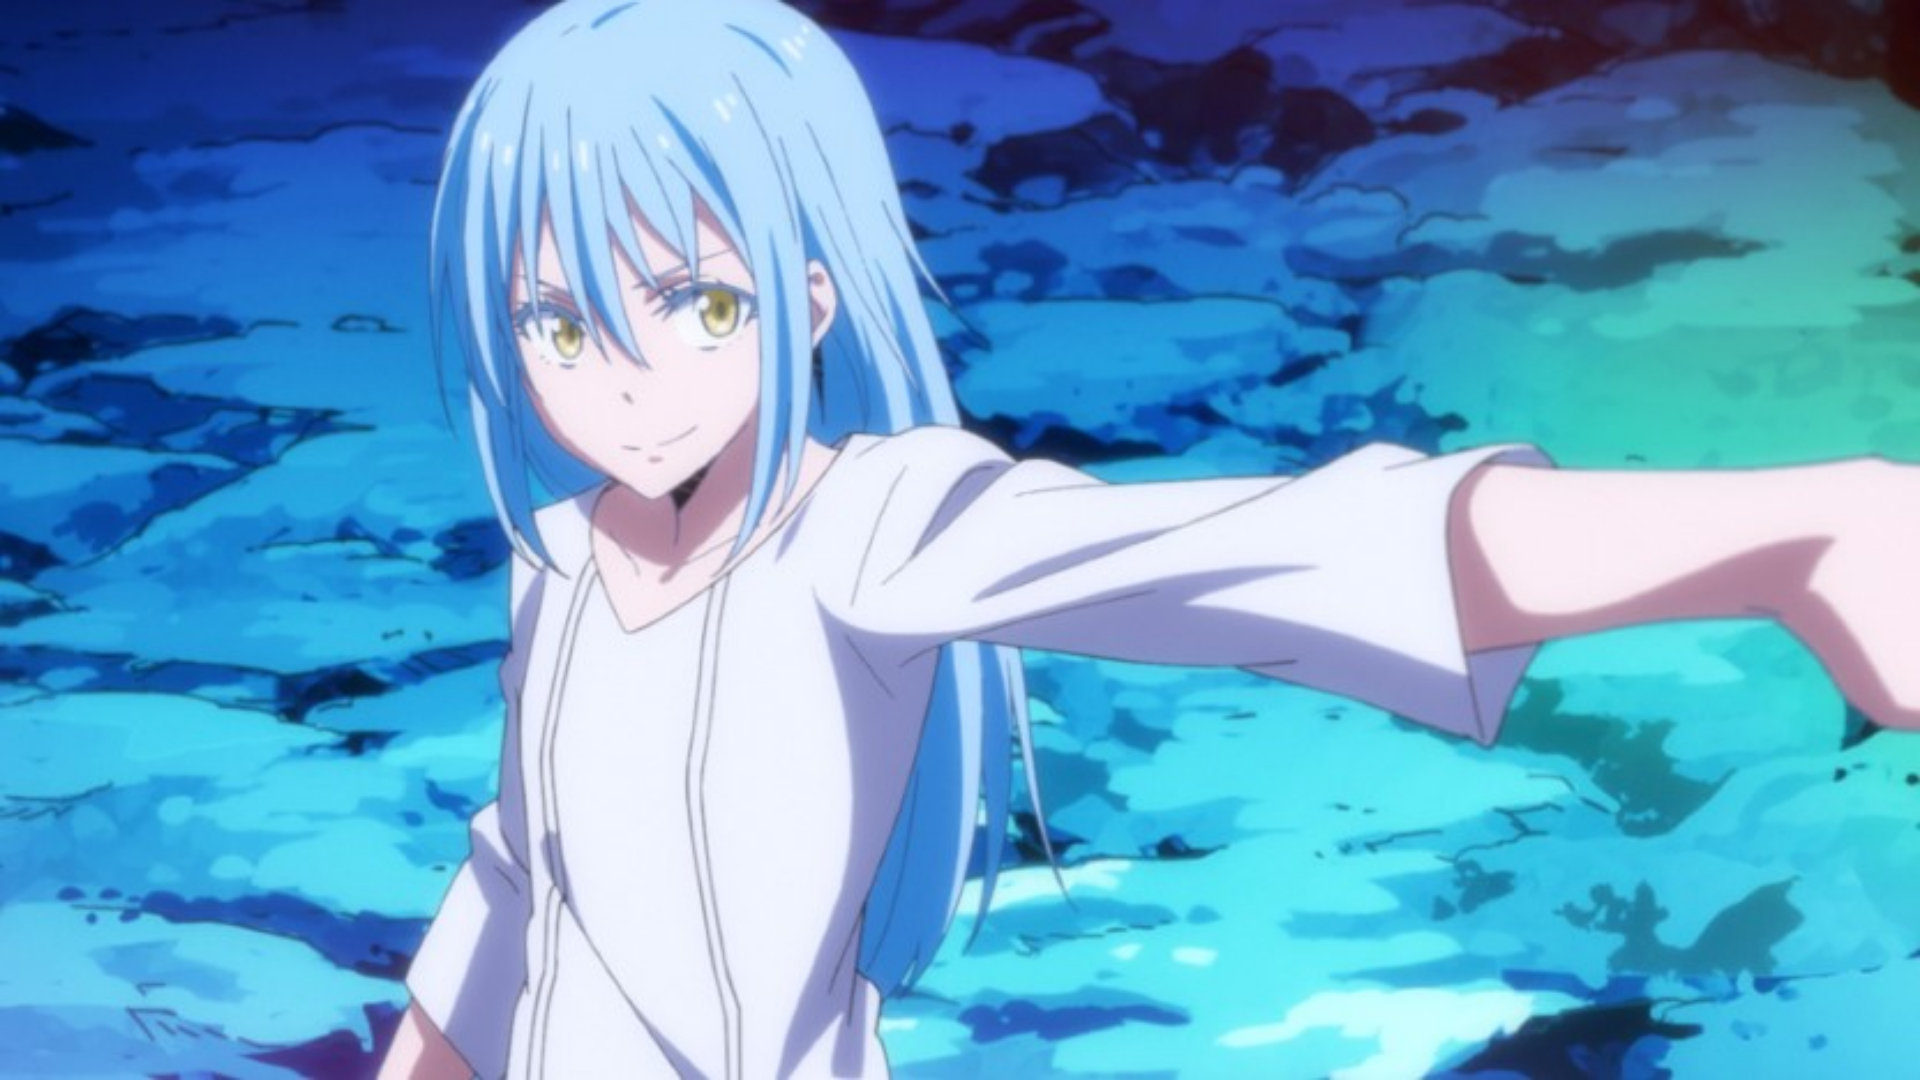 That Time I Got Reincarnated as a Slime Episode 37 Preview